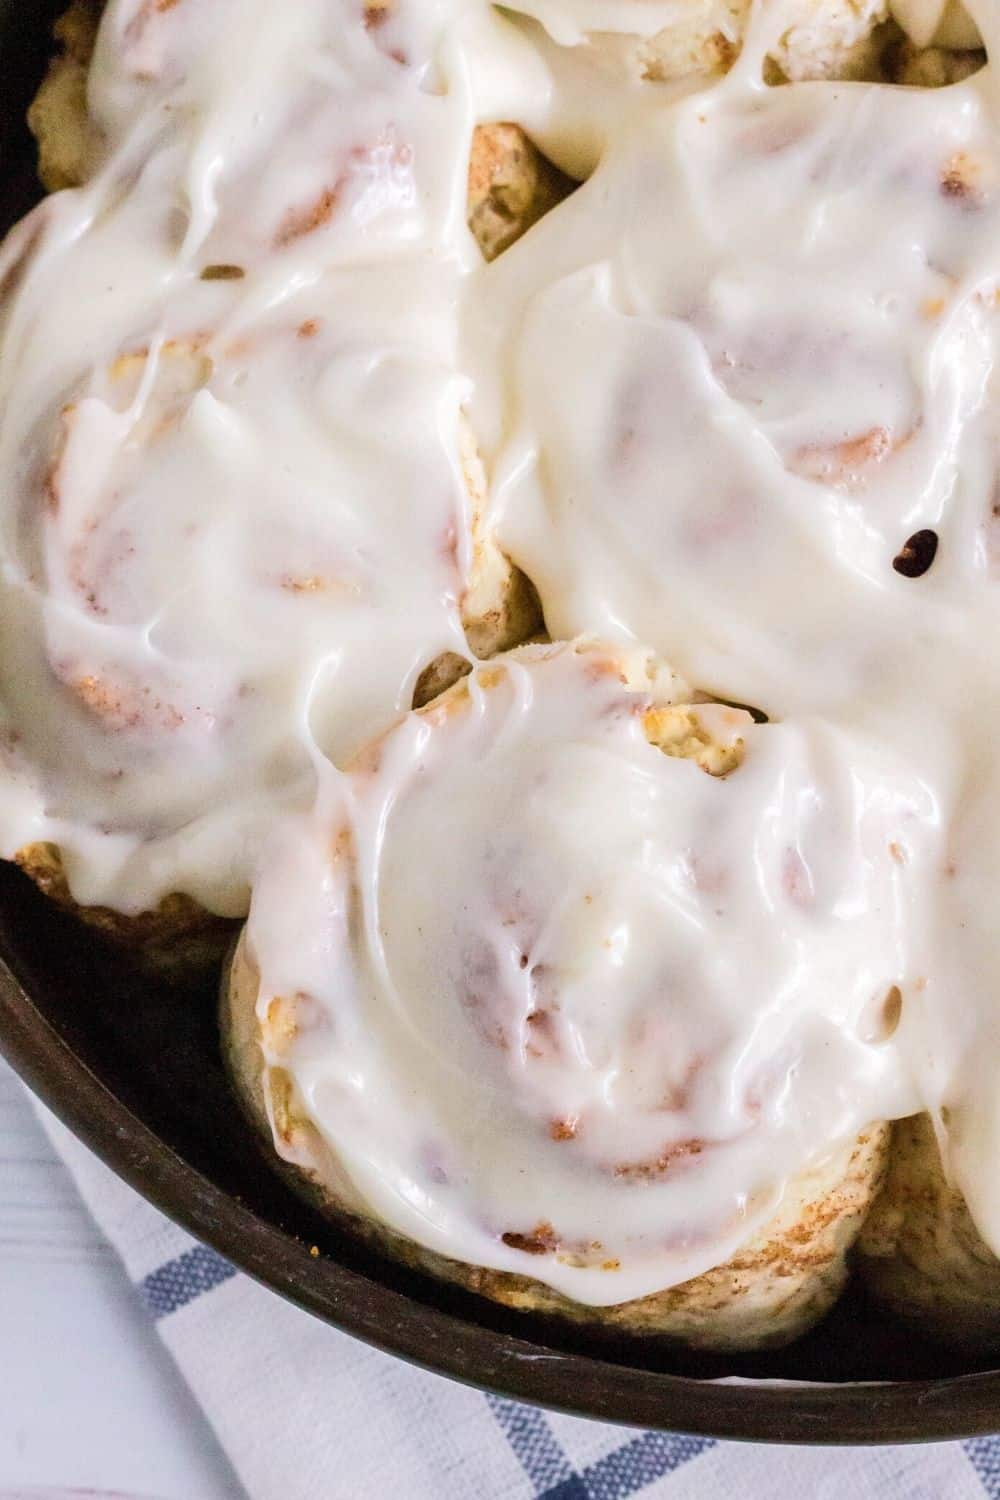 cream cheese frosting spread over cinnamon rolls in the pan